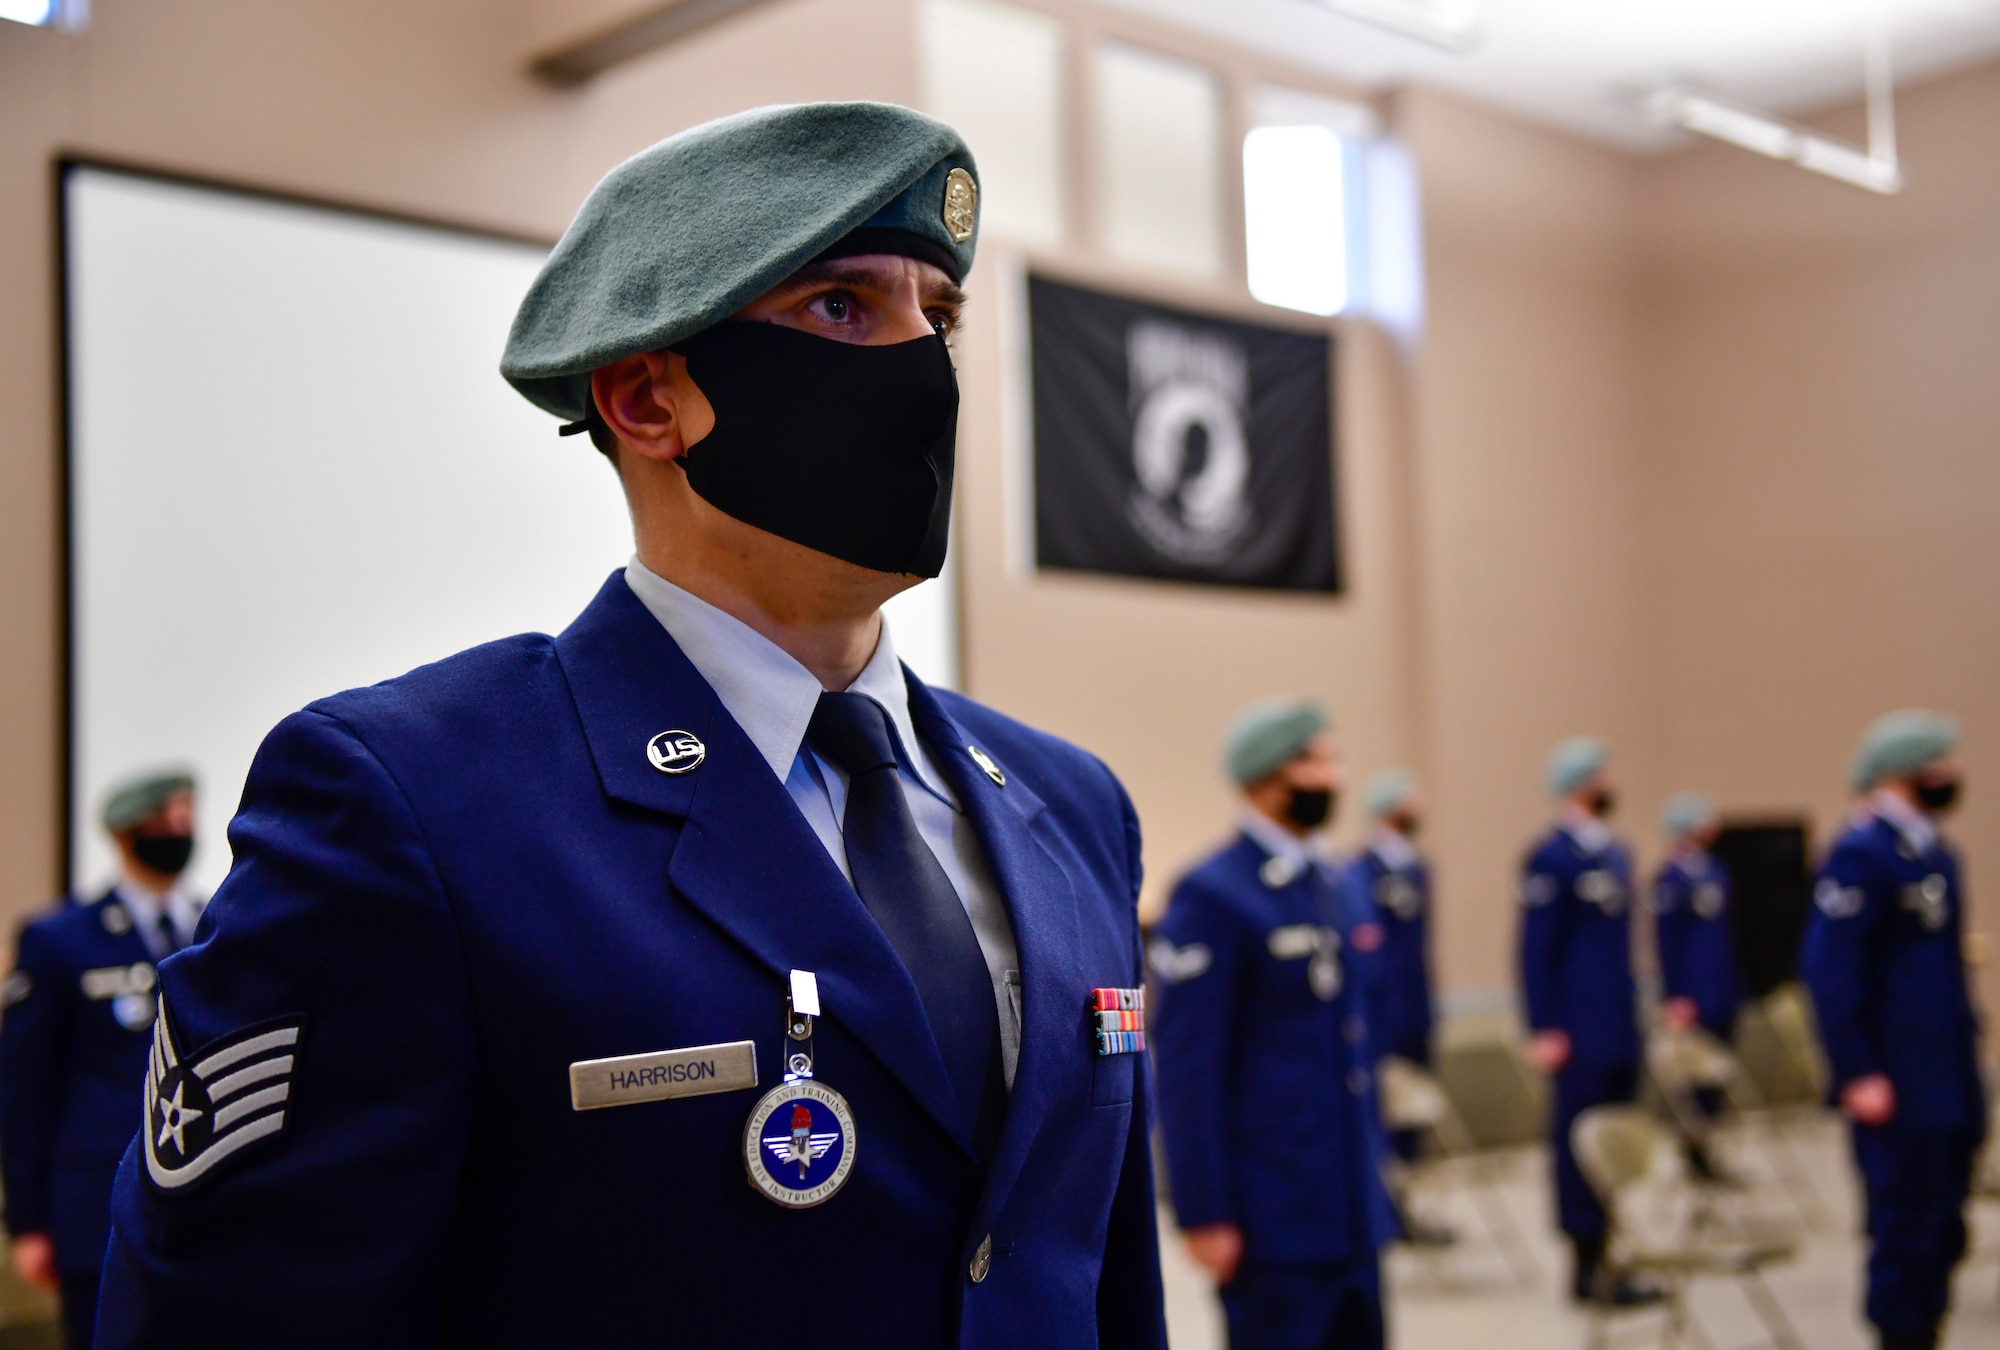 U.S. Air Force Staff Sgt. Dillon Harrison, 66th Training Squadron Survival, Evasion, Resistance and Escape specialist, stands in formation during a SERE Specialist Apprentice Course graduation ceremony at Fairchild Air Force Base, Washington, January 8, 2021. Harrison was the team leader for class 21-01, which holds the lowest attrition rate in years at only 7 percent in contrast to the average 50 percent. (U.S. Air Force photo by Senior Airman Ryan Gomez)